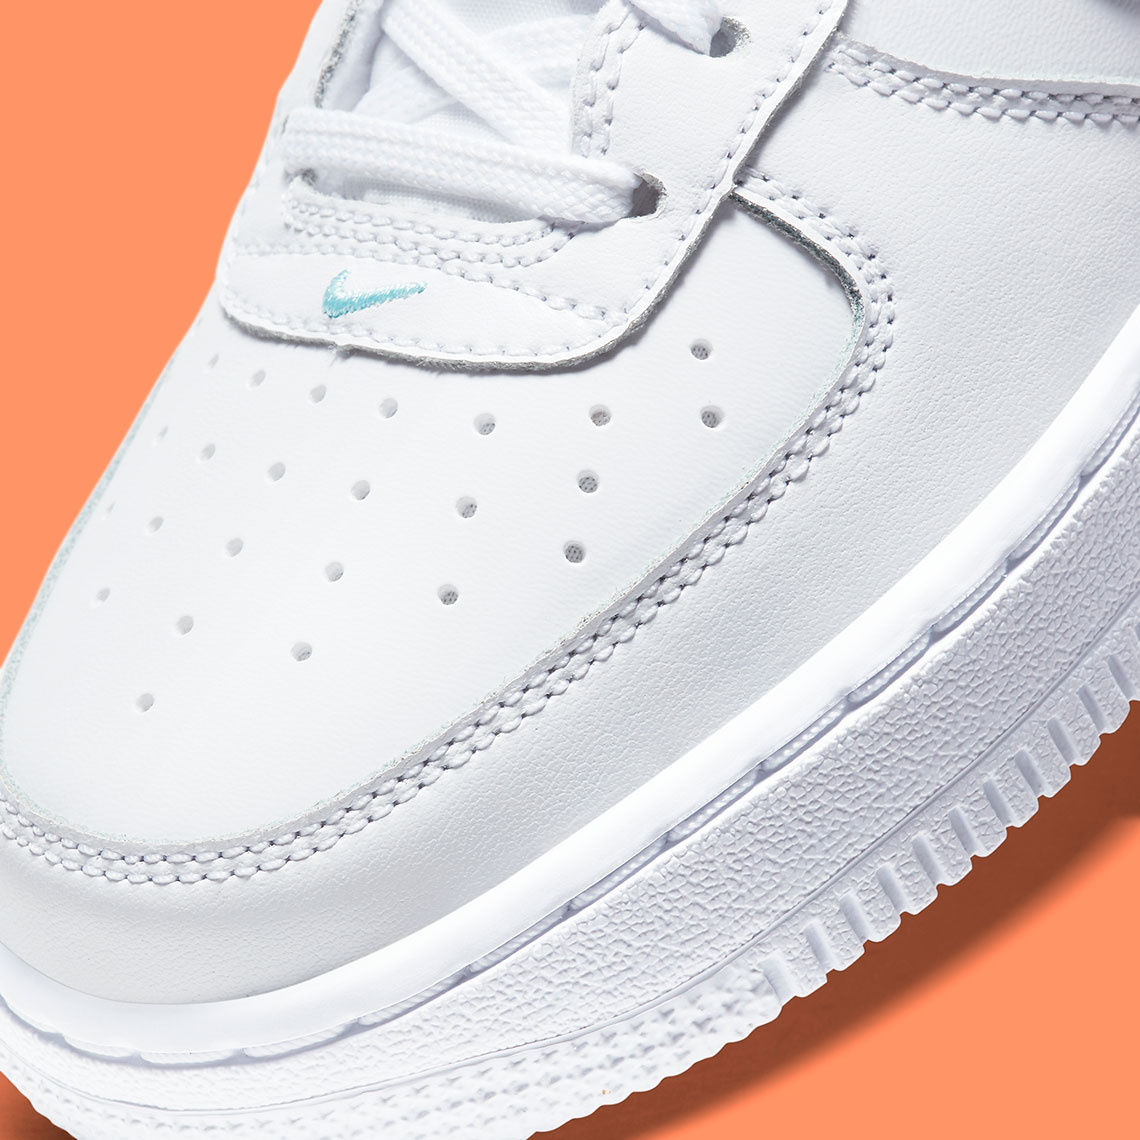 Nike Air Force 1 GS White/Light Thistle DC8188-100 | SneakerNews.com